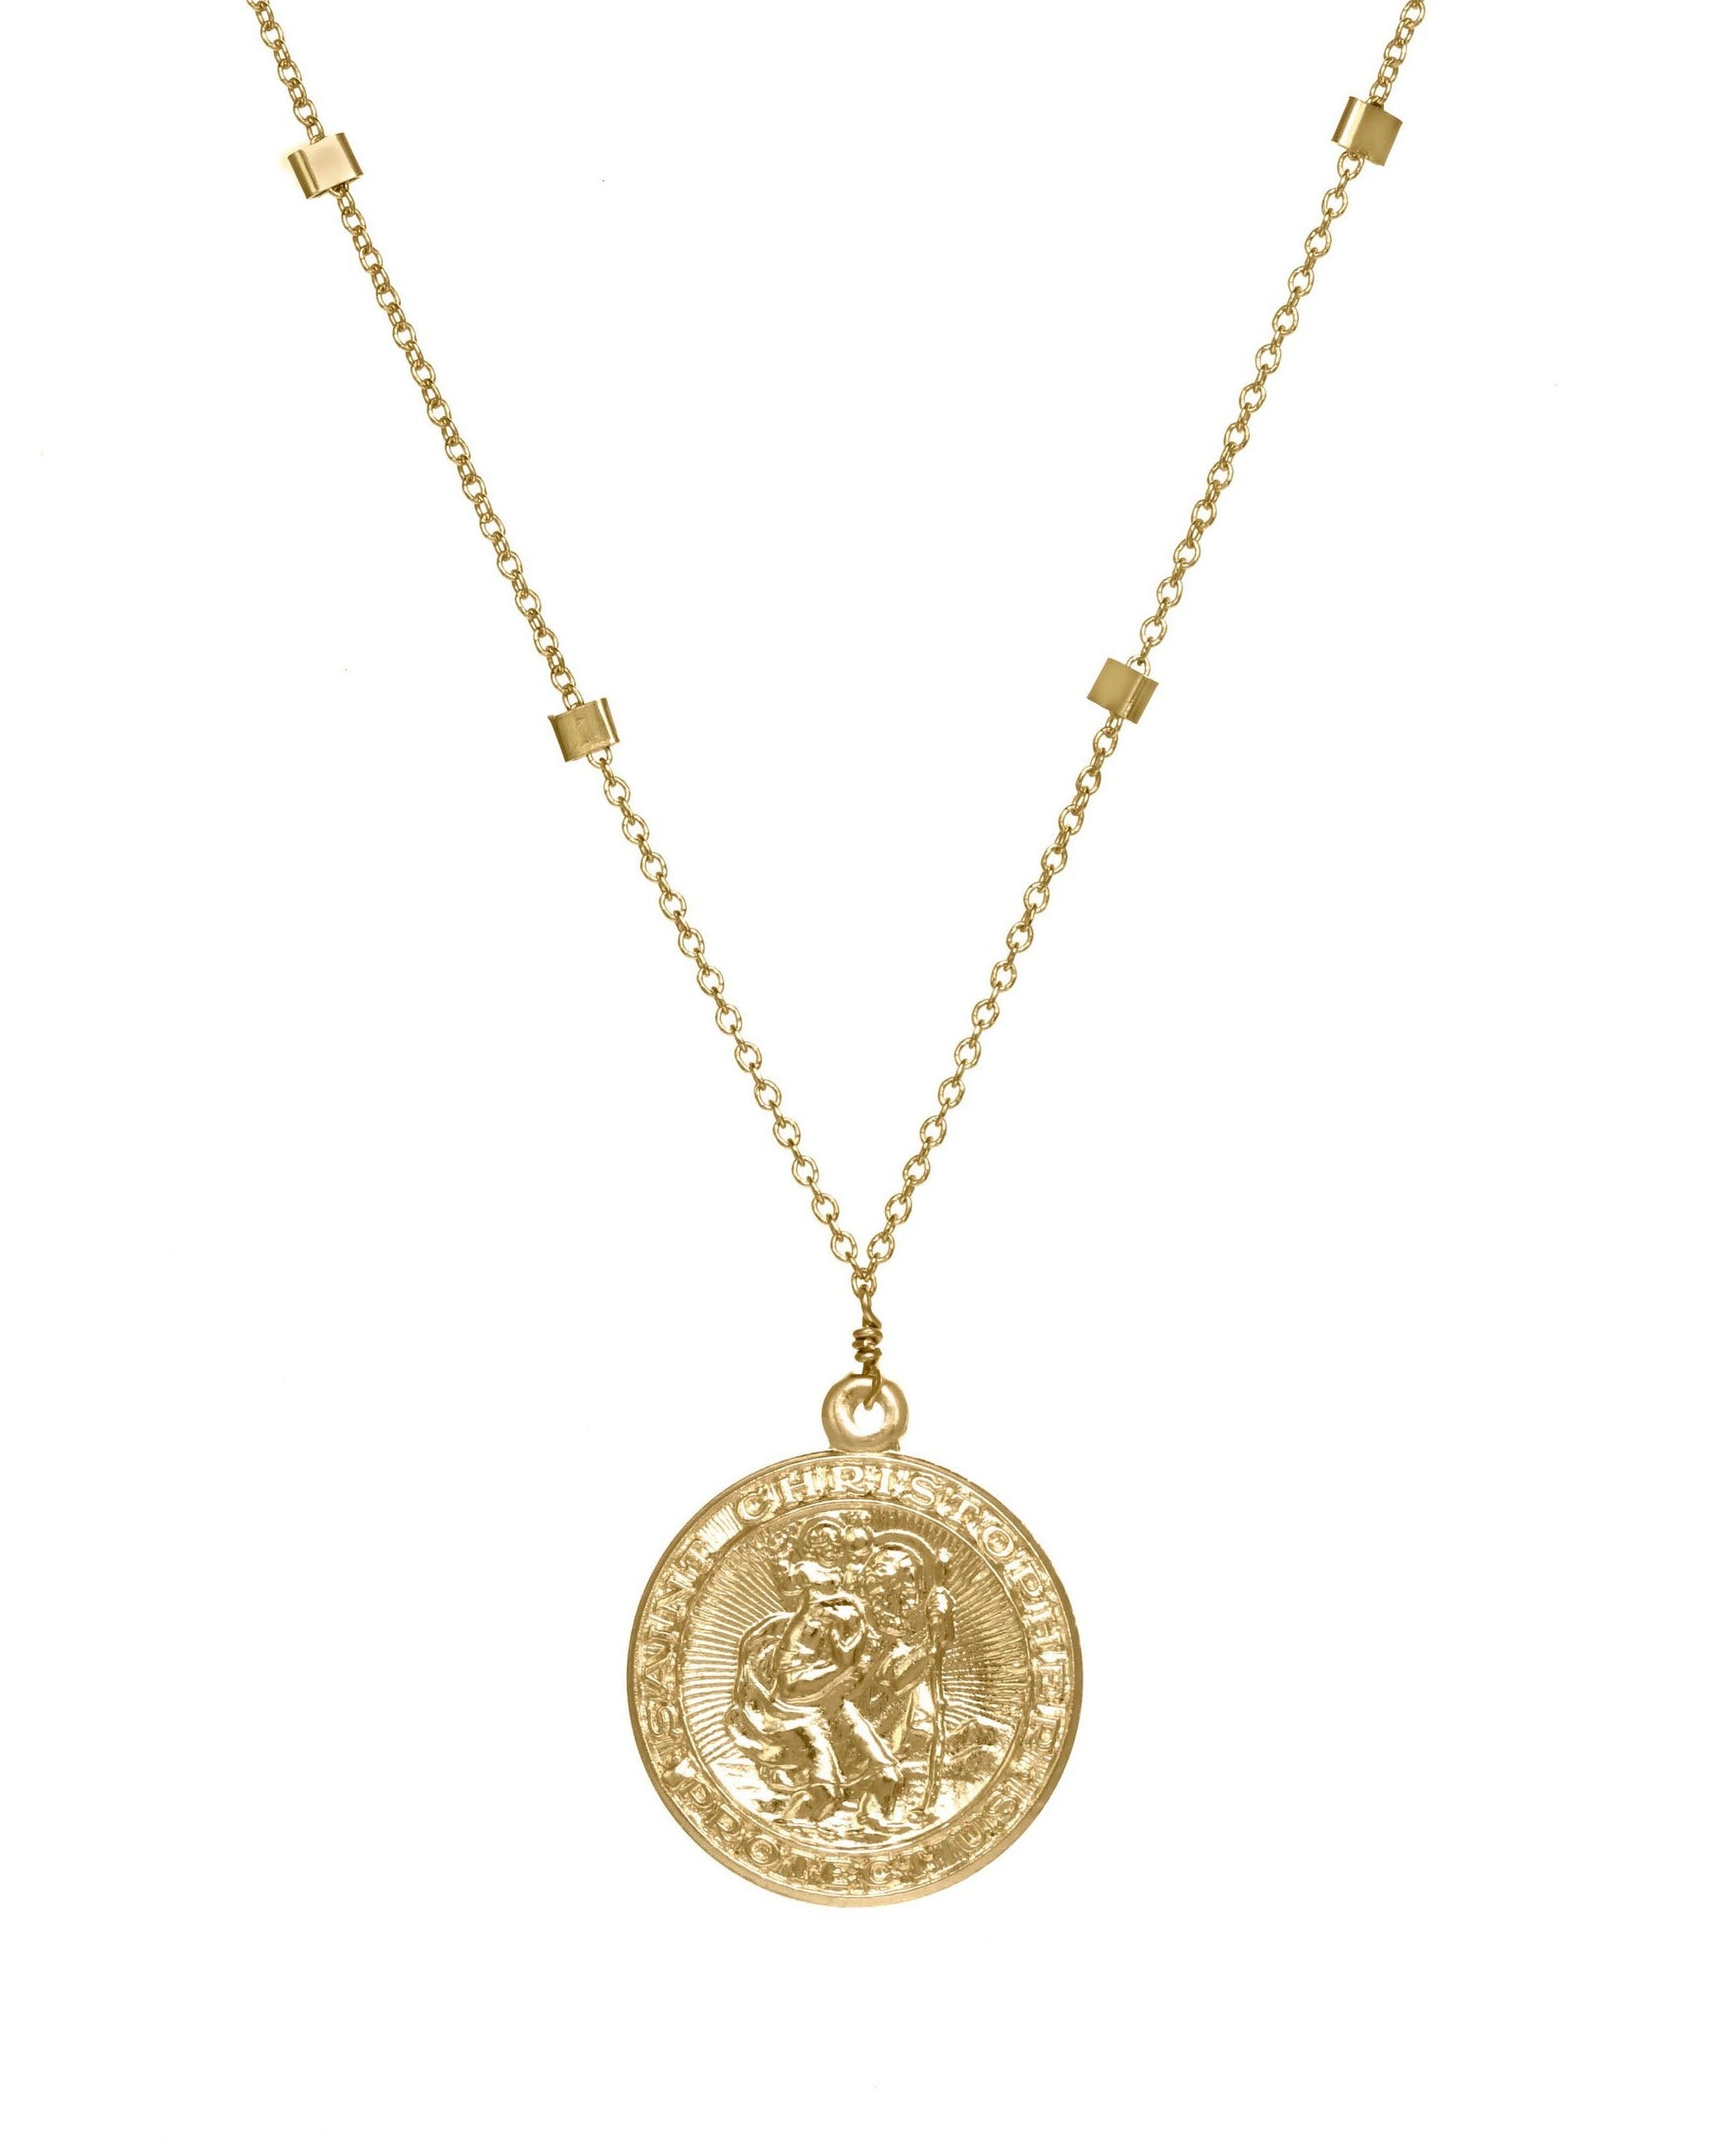 San Cris Necklace by KOZAKH. A 16 to 18 inch adjustable length necklace, crafted in 14K Gold Filled, featuring a 16mm Saint Christopher Medallion.